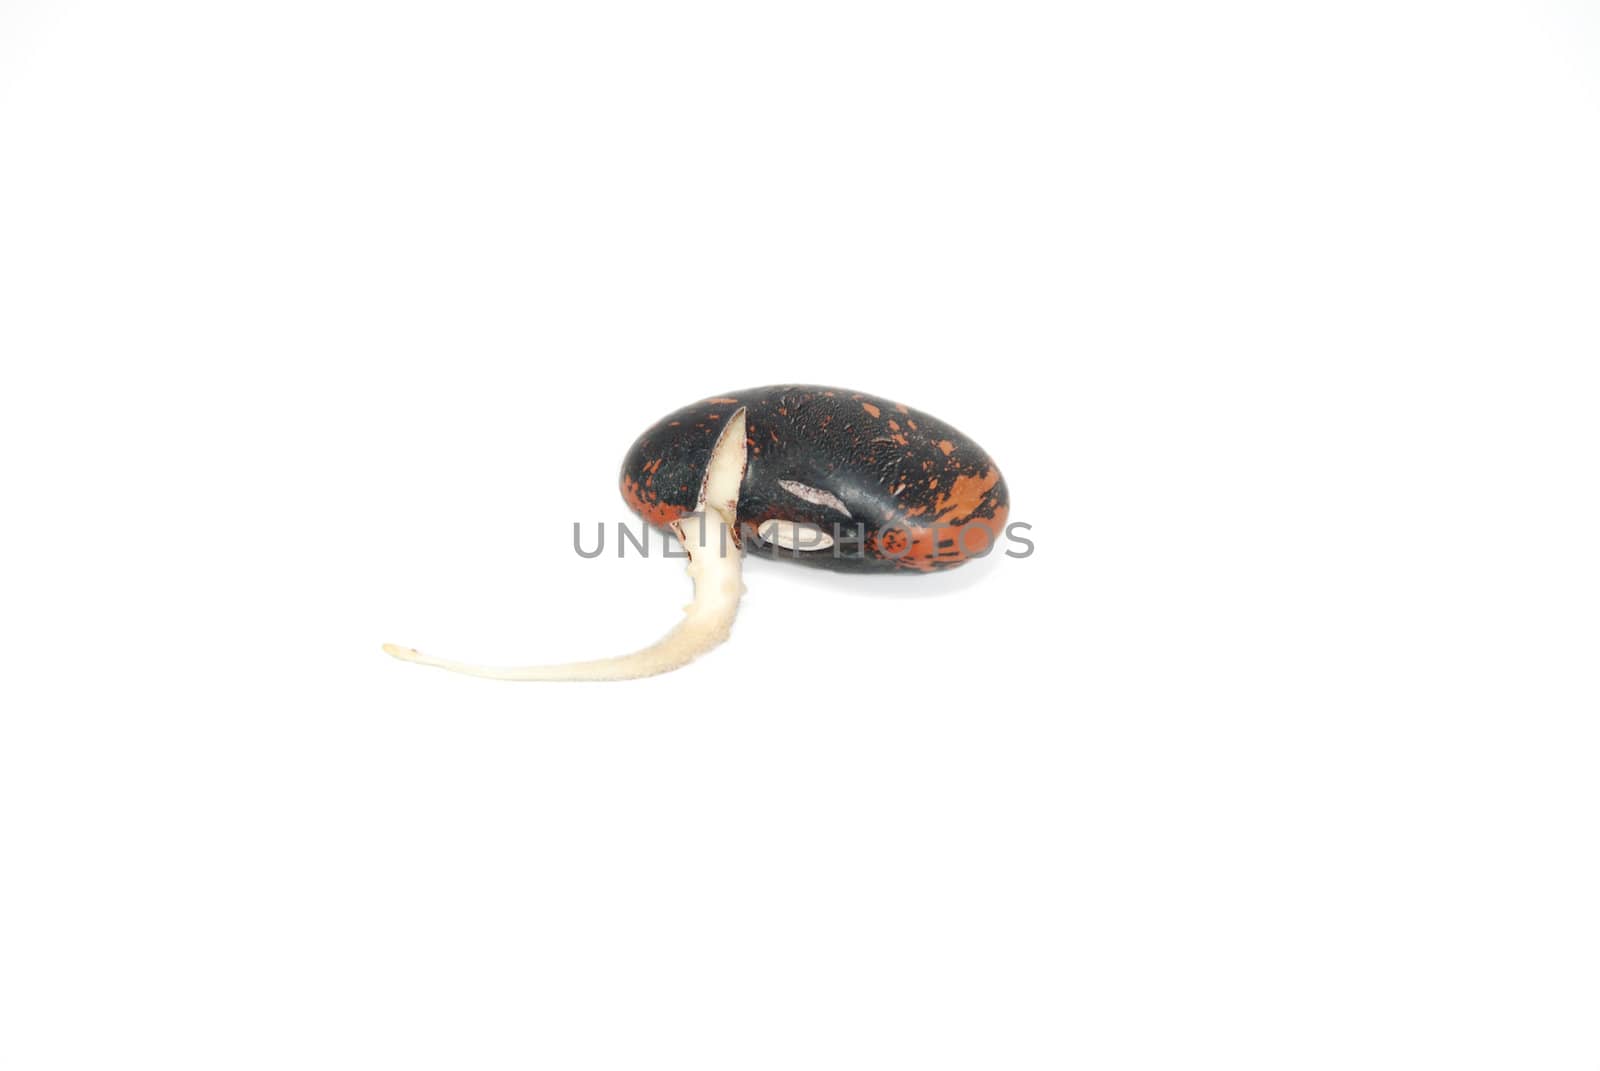 Single germinated runner bean seed sprouting, isolated on a white background